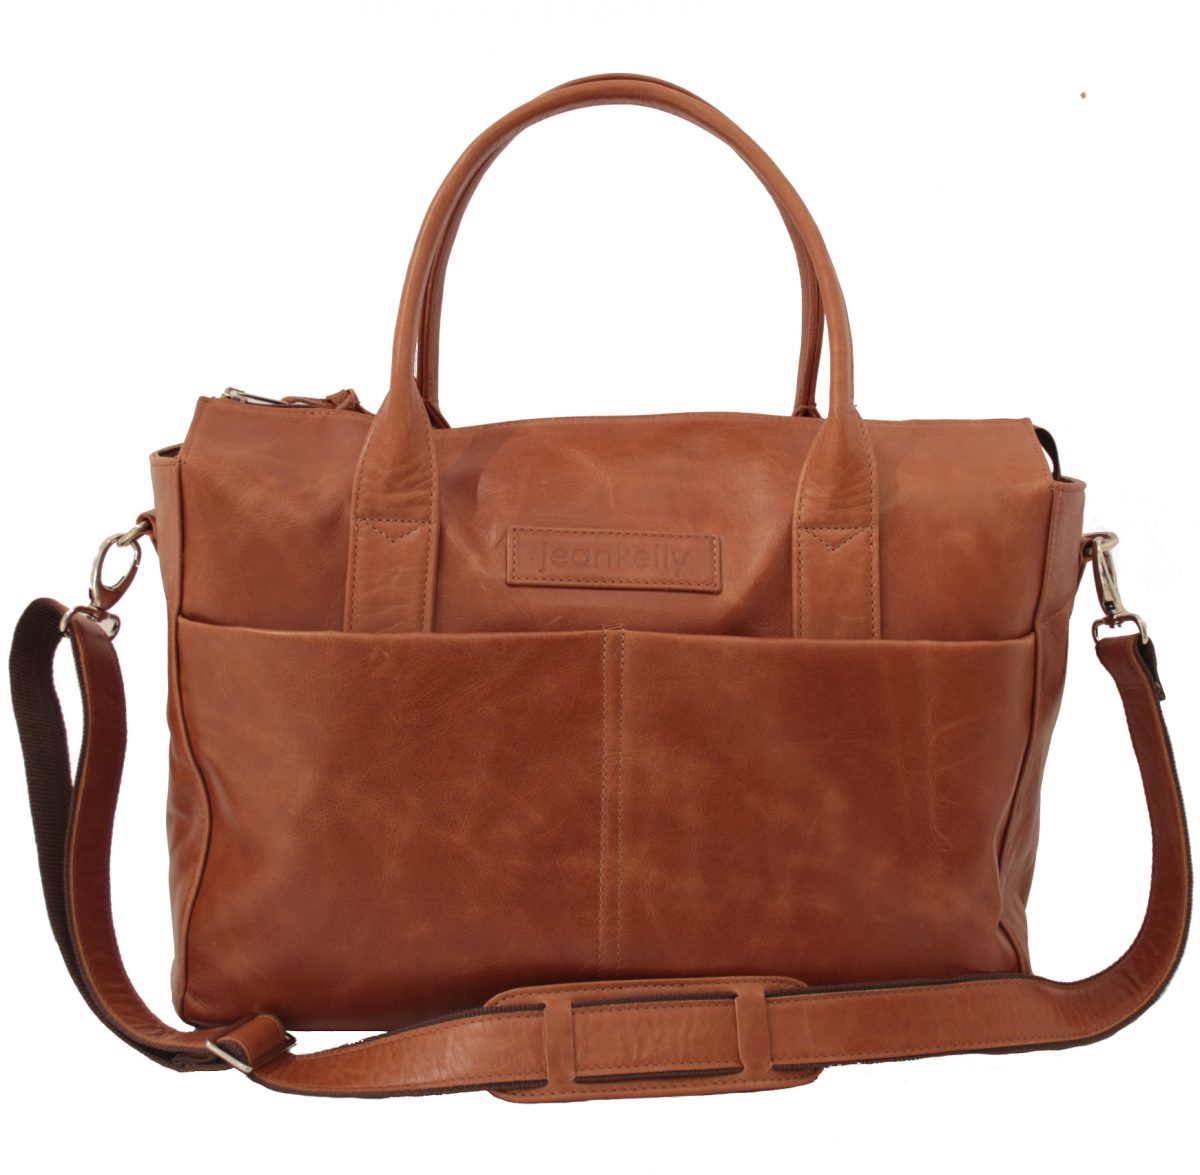 jeankelly_leather baby bag